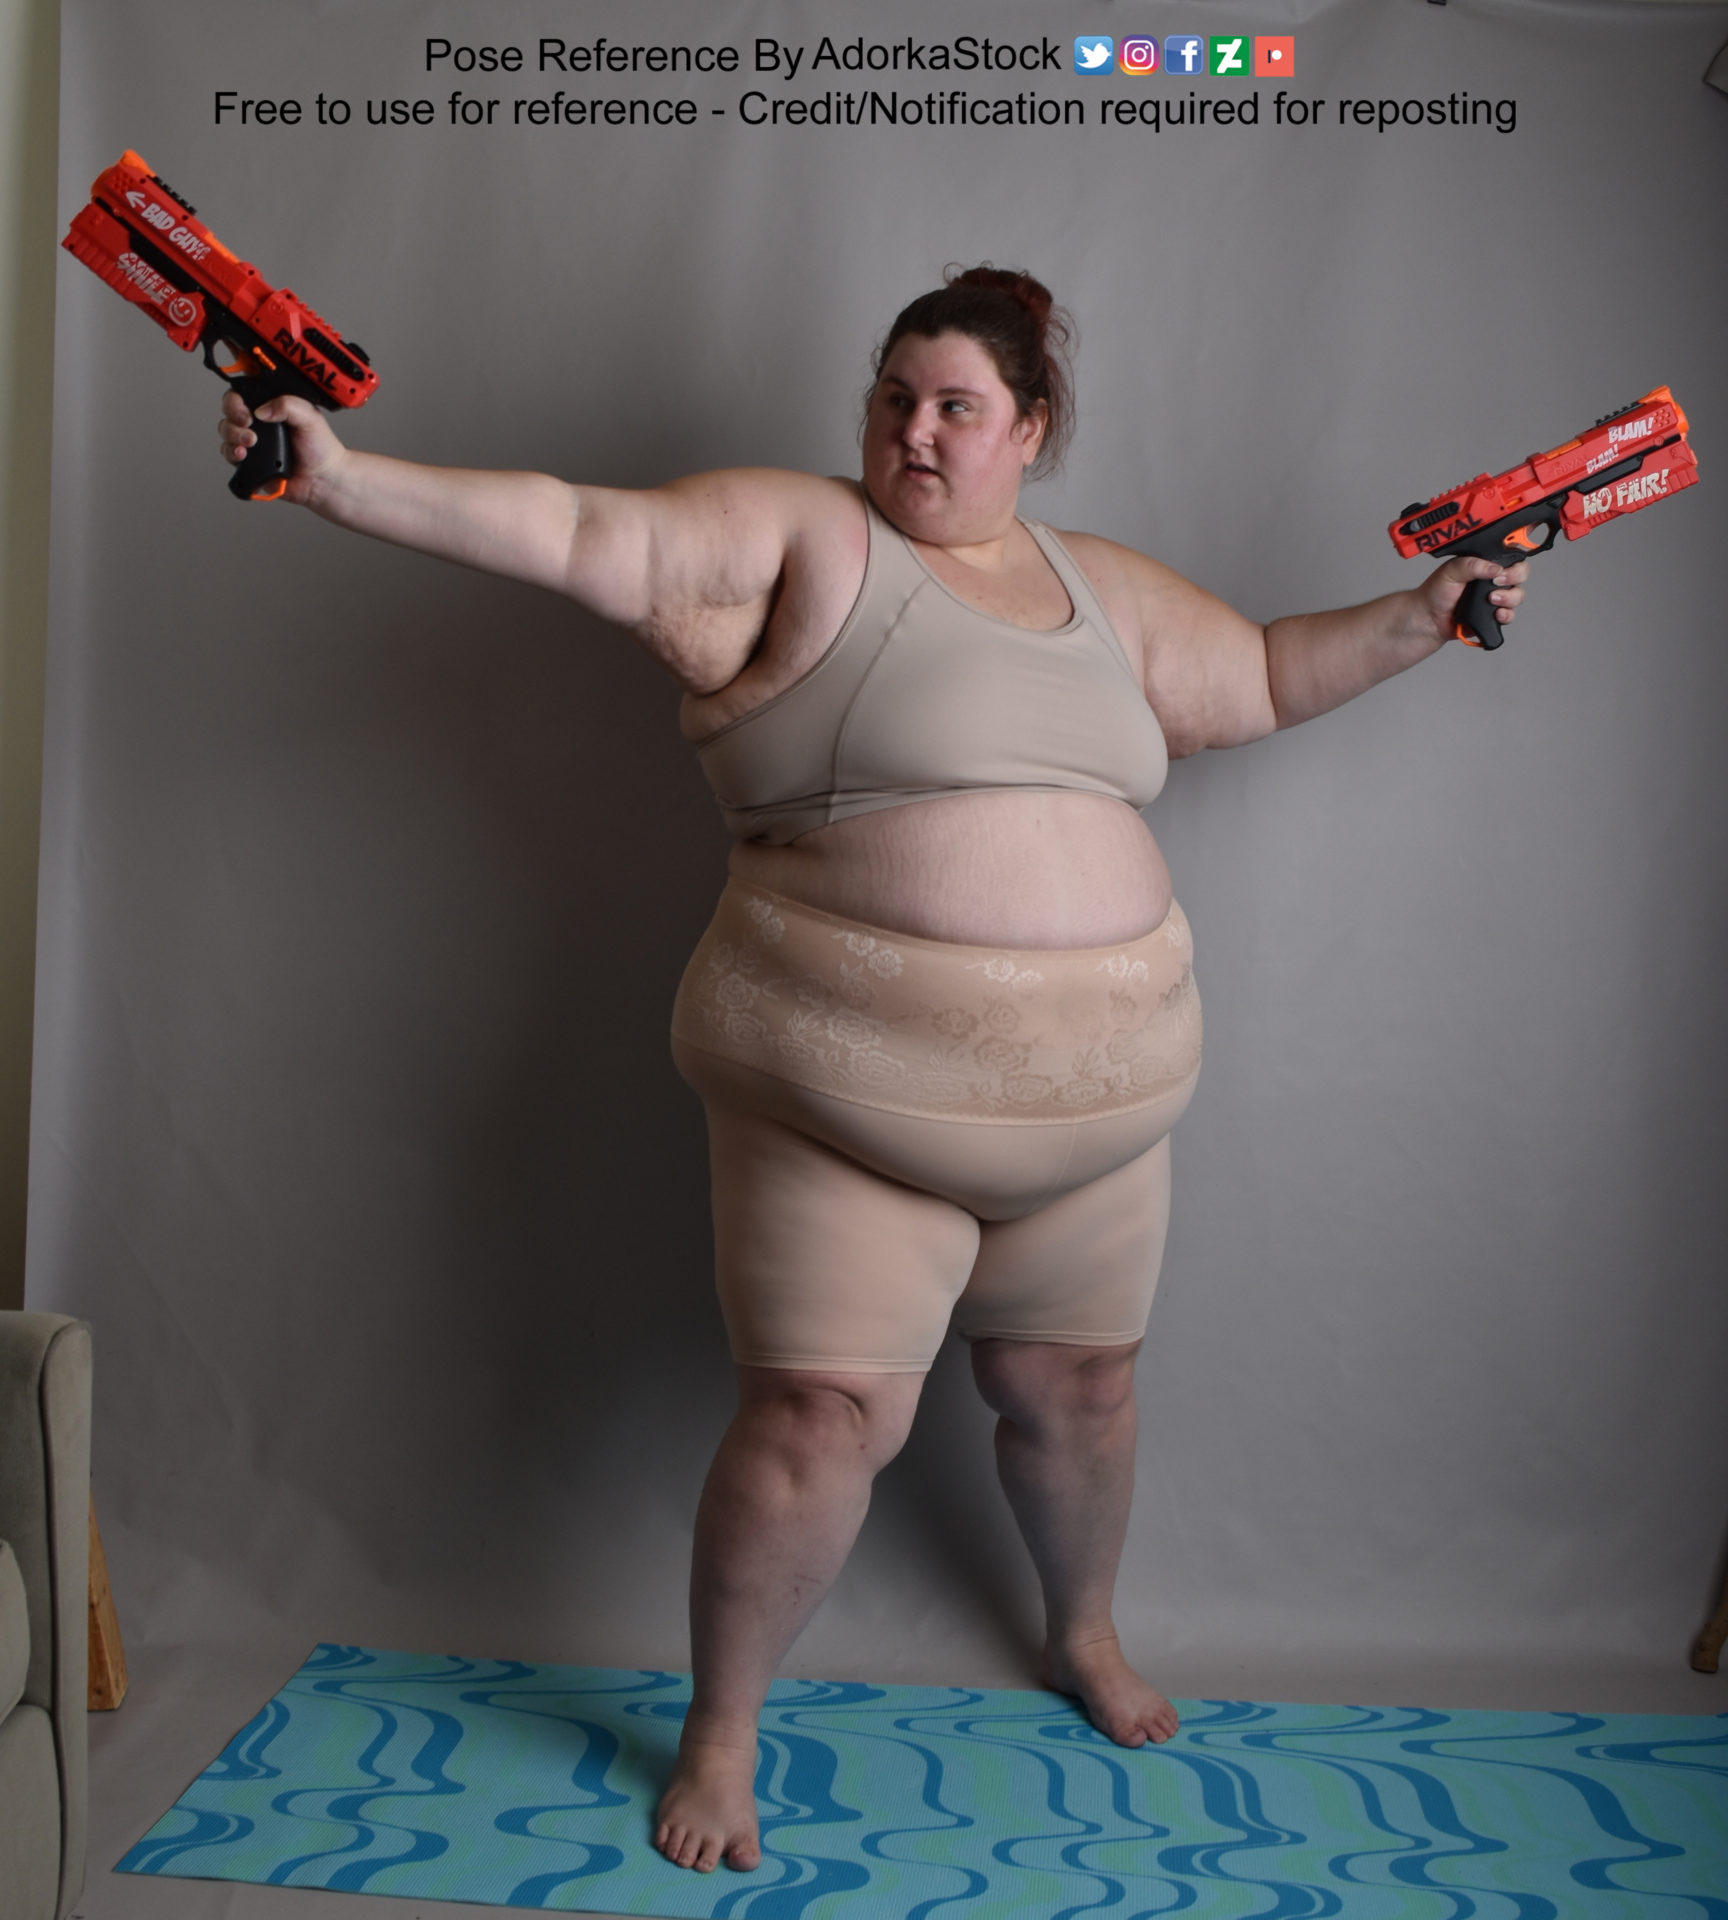 fat, white, female pose reference model in an open footed stance with two nerf guns pointed in opposite directions